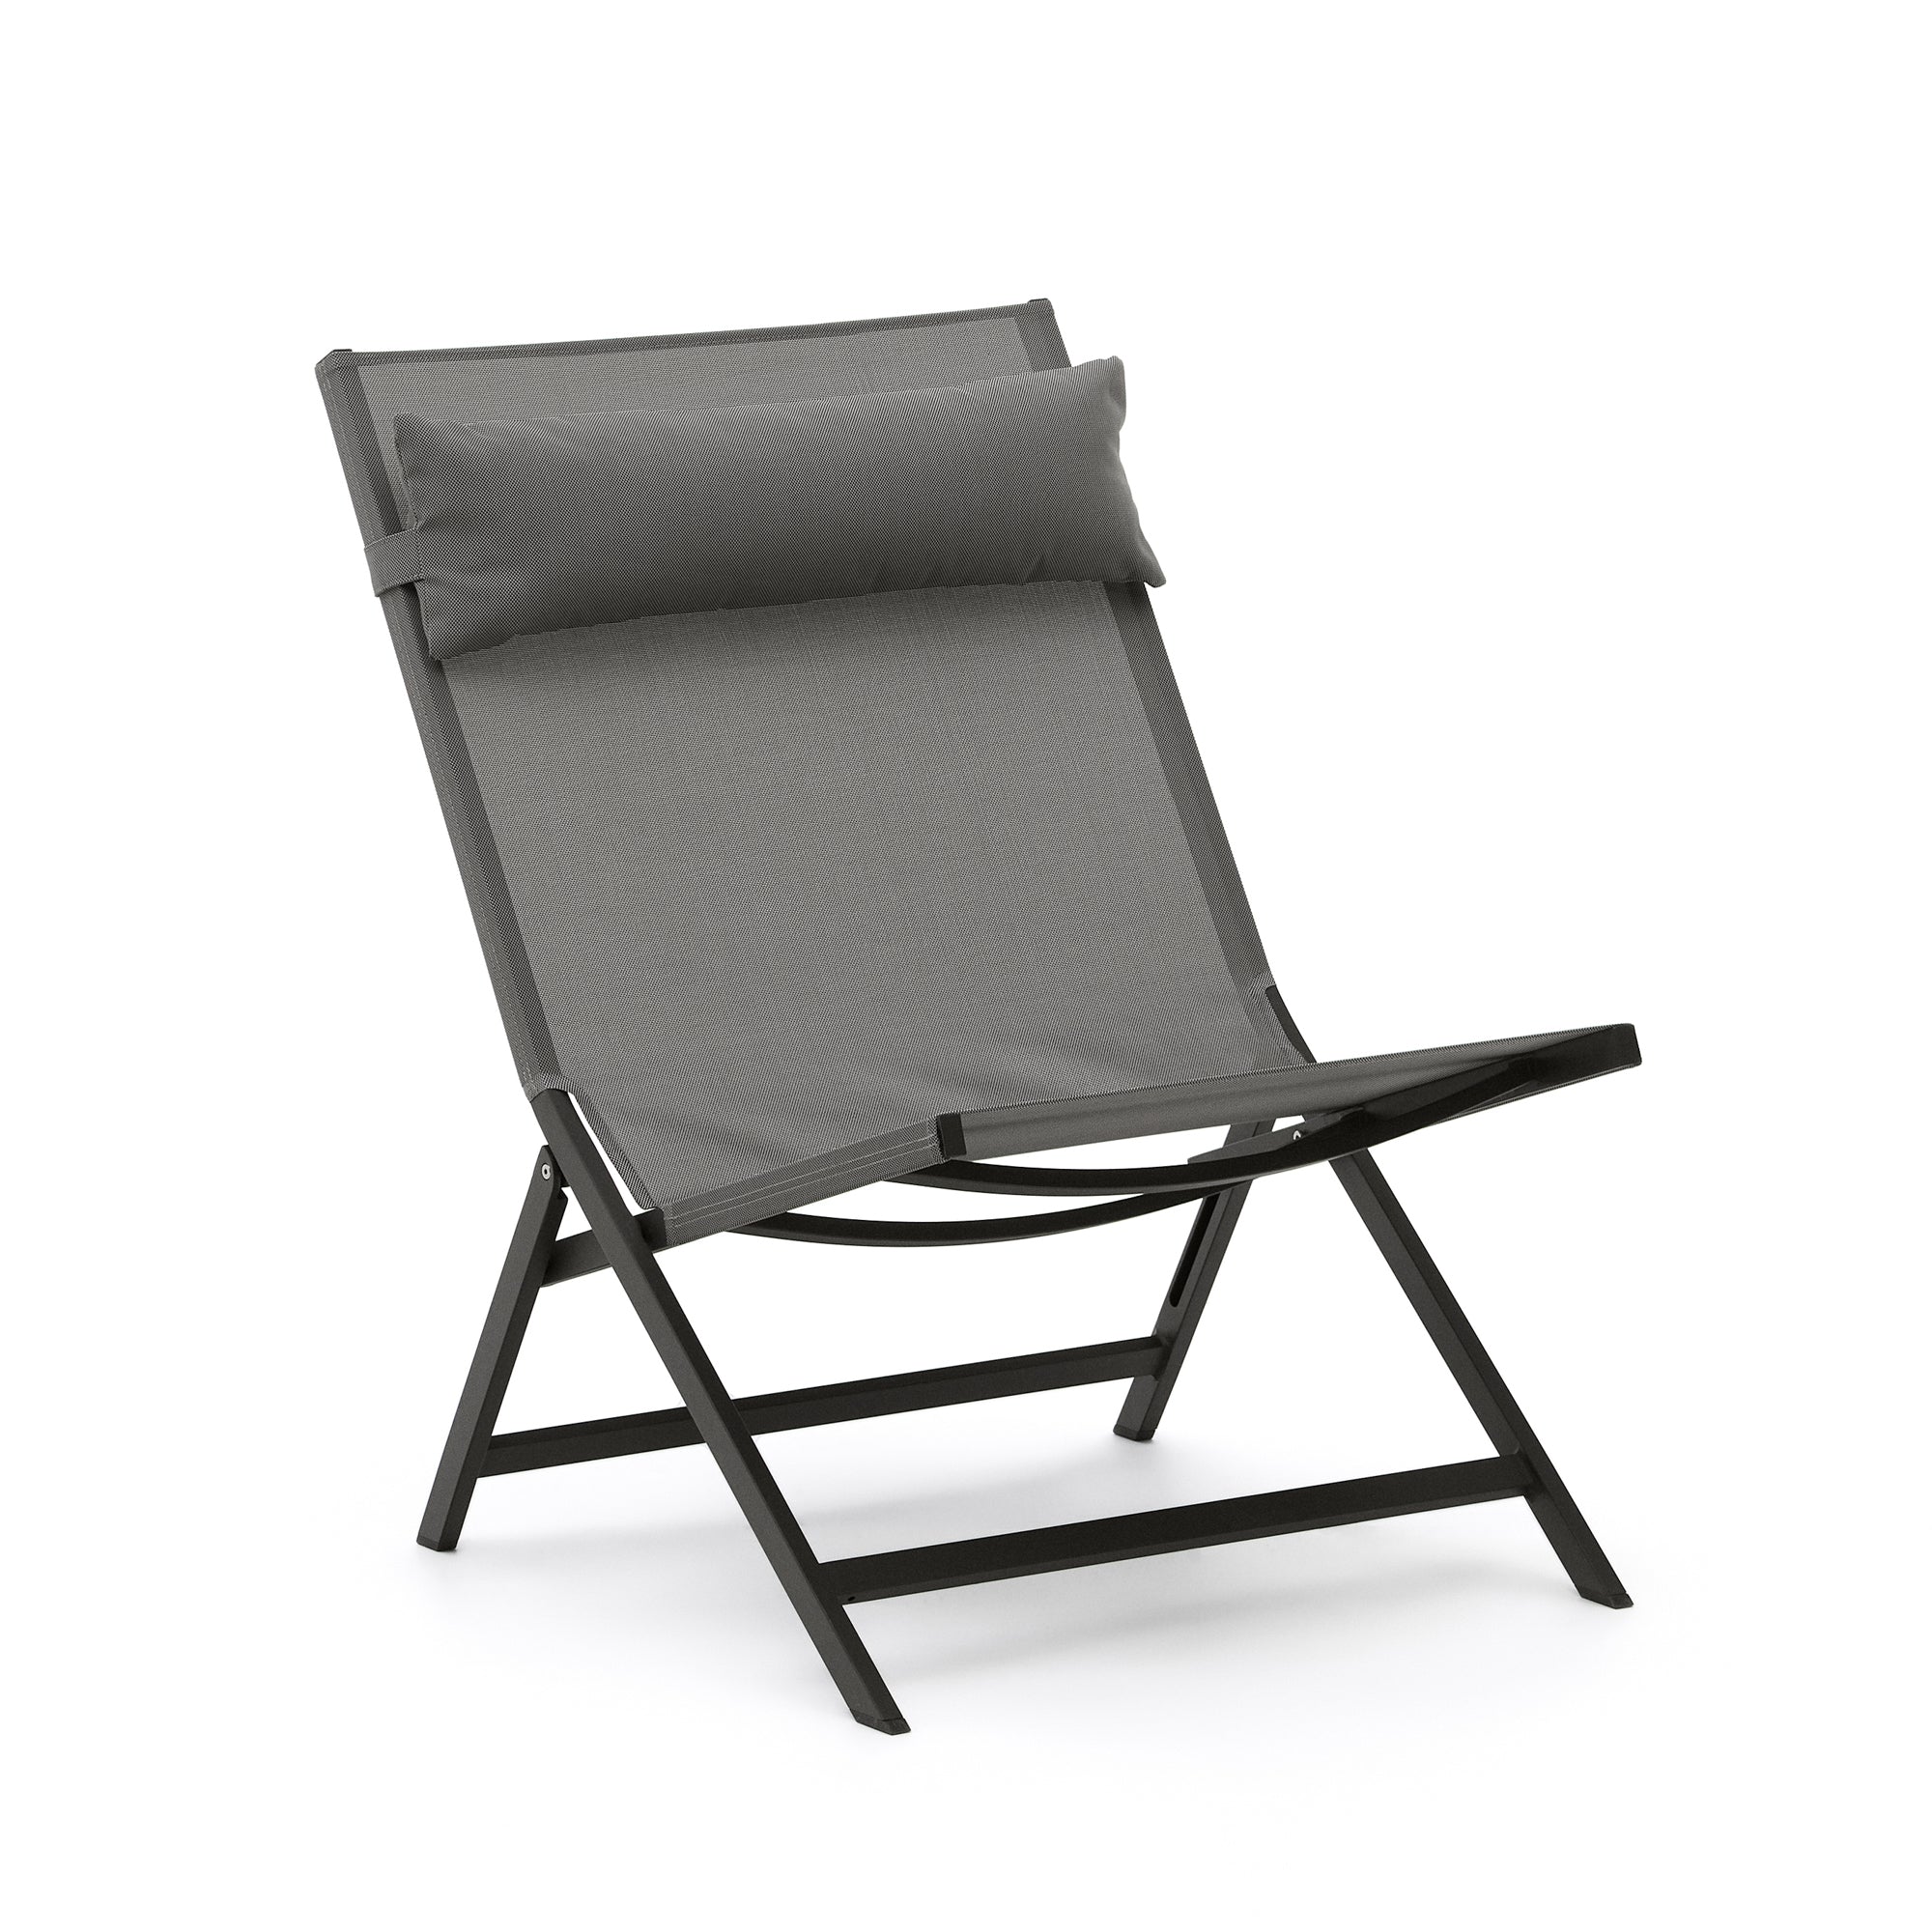 Canutells folding armchair in aluminum with black finish